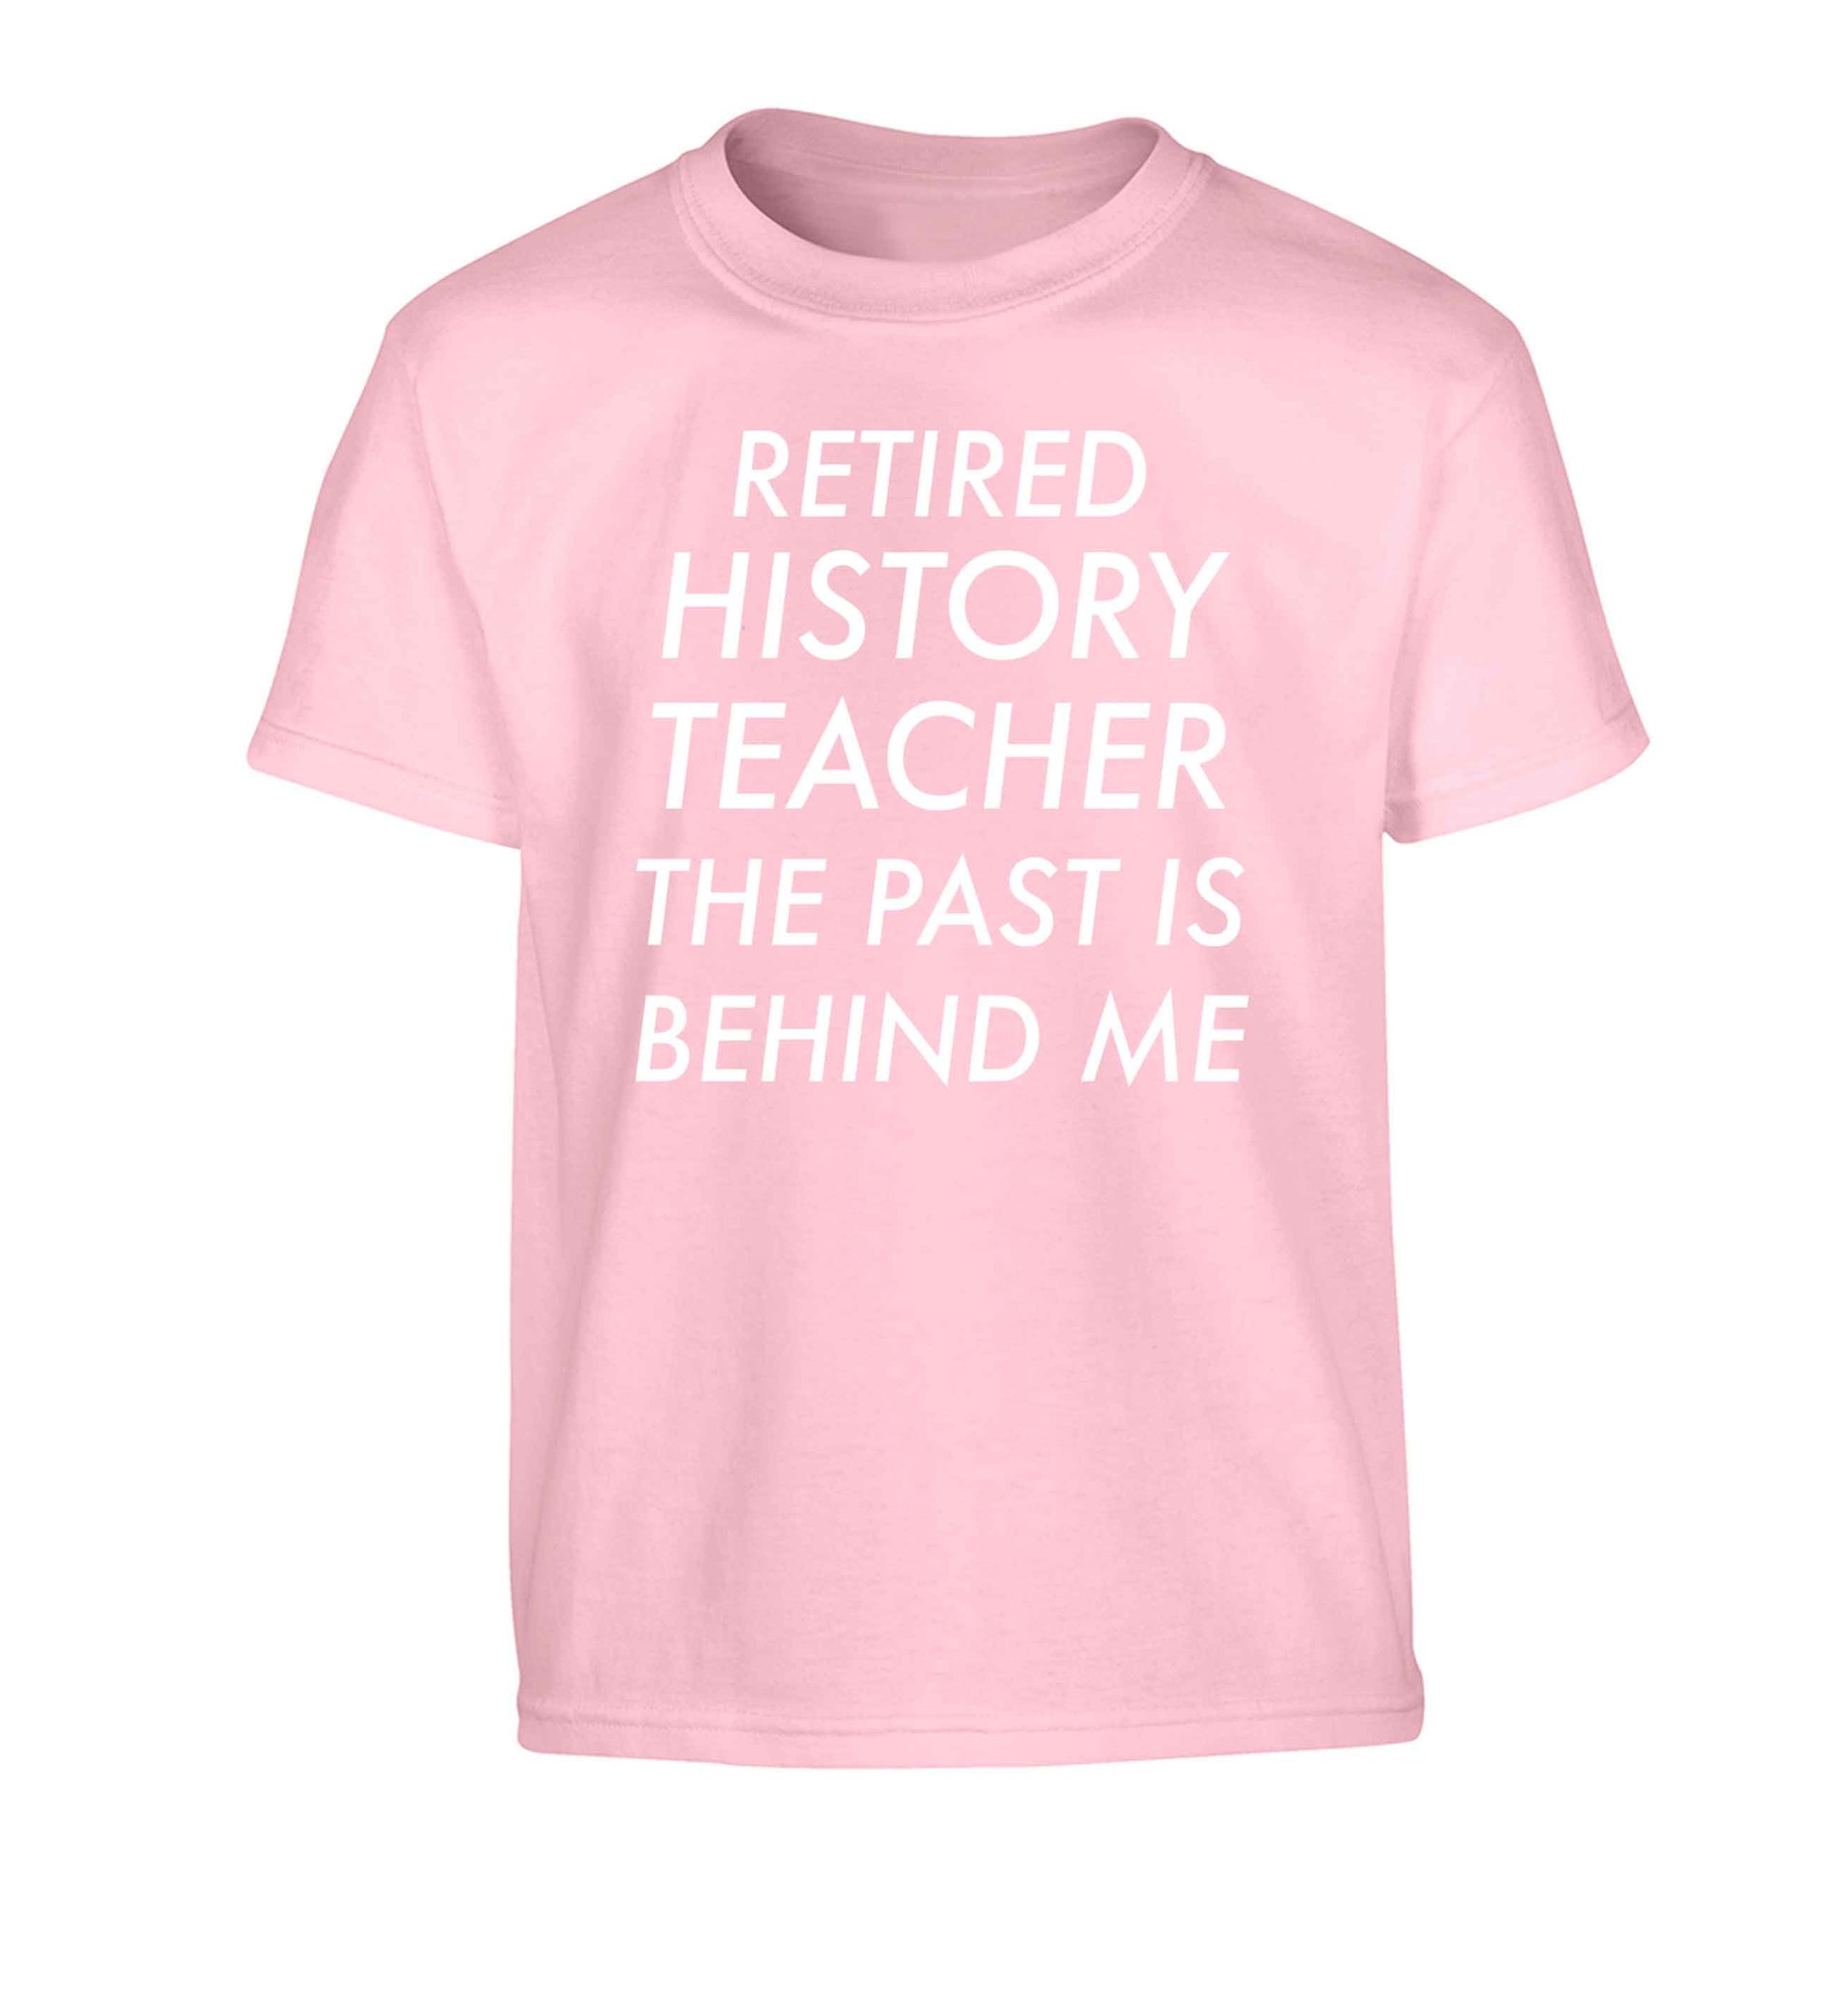 Retired history teacher the past is behind me Children's light pink Tshirt 12-13 Years